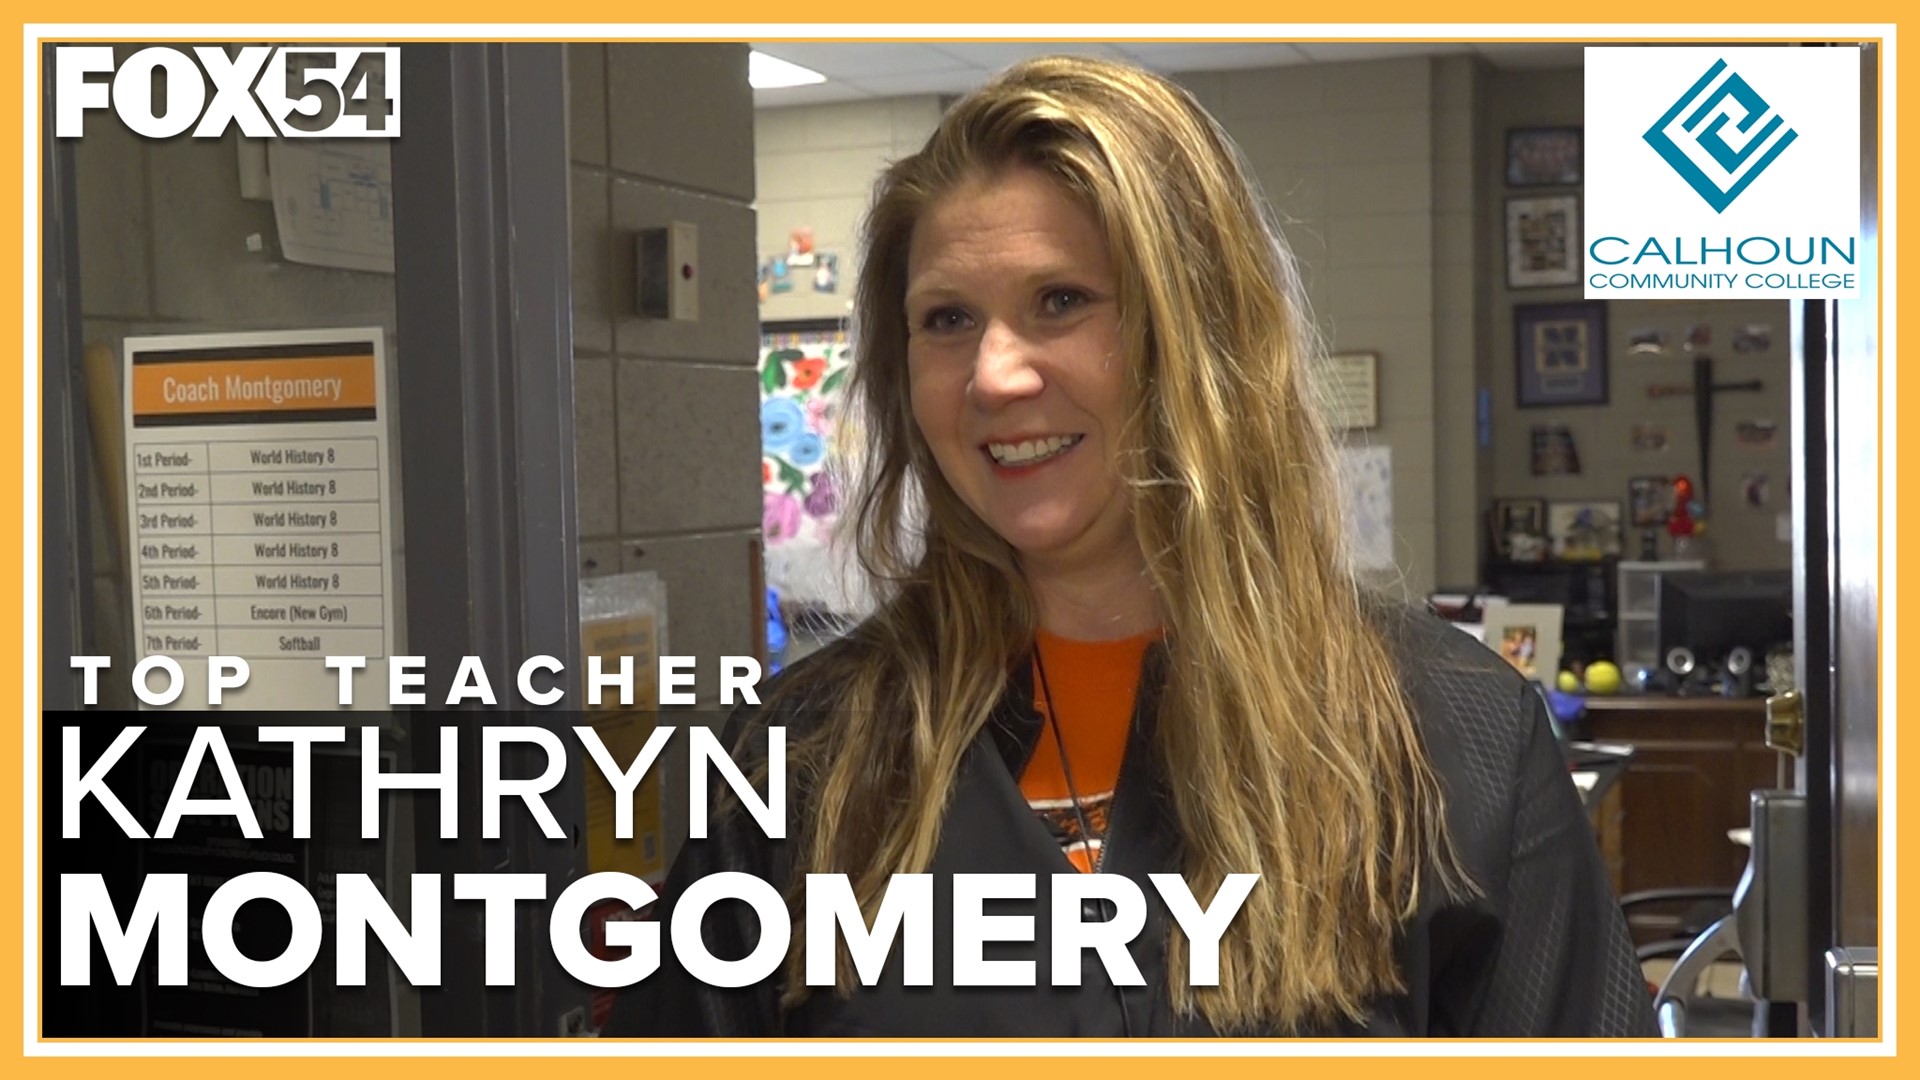 Kathryn Montgomery is a World History teacher and softball coach at Brooks High School.